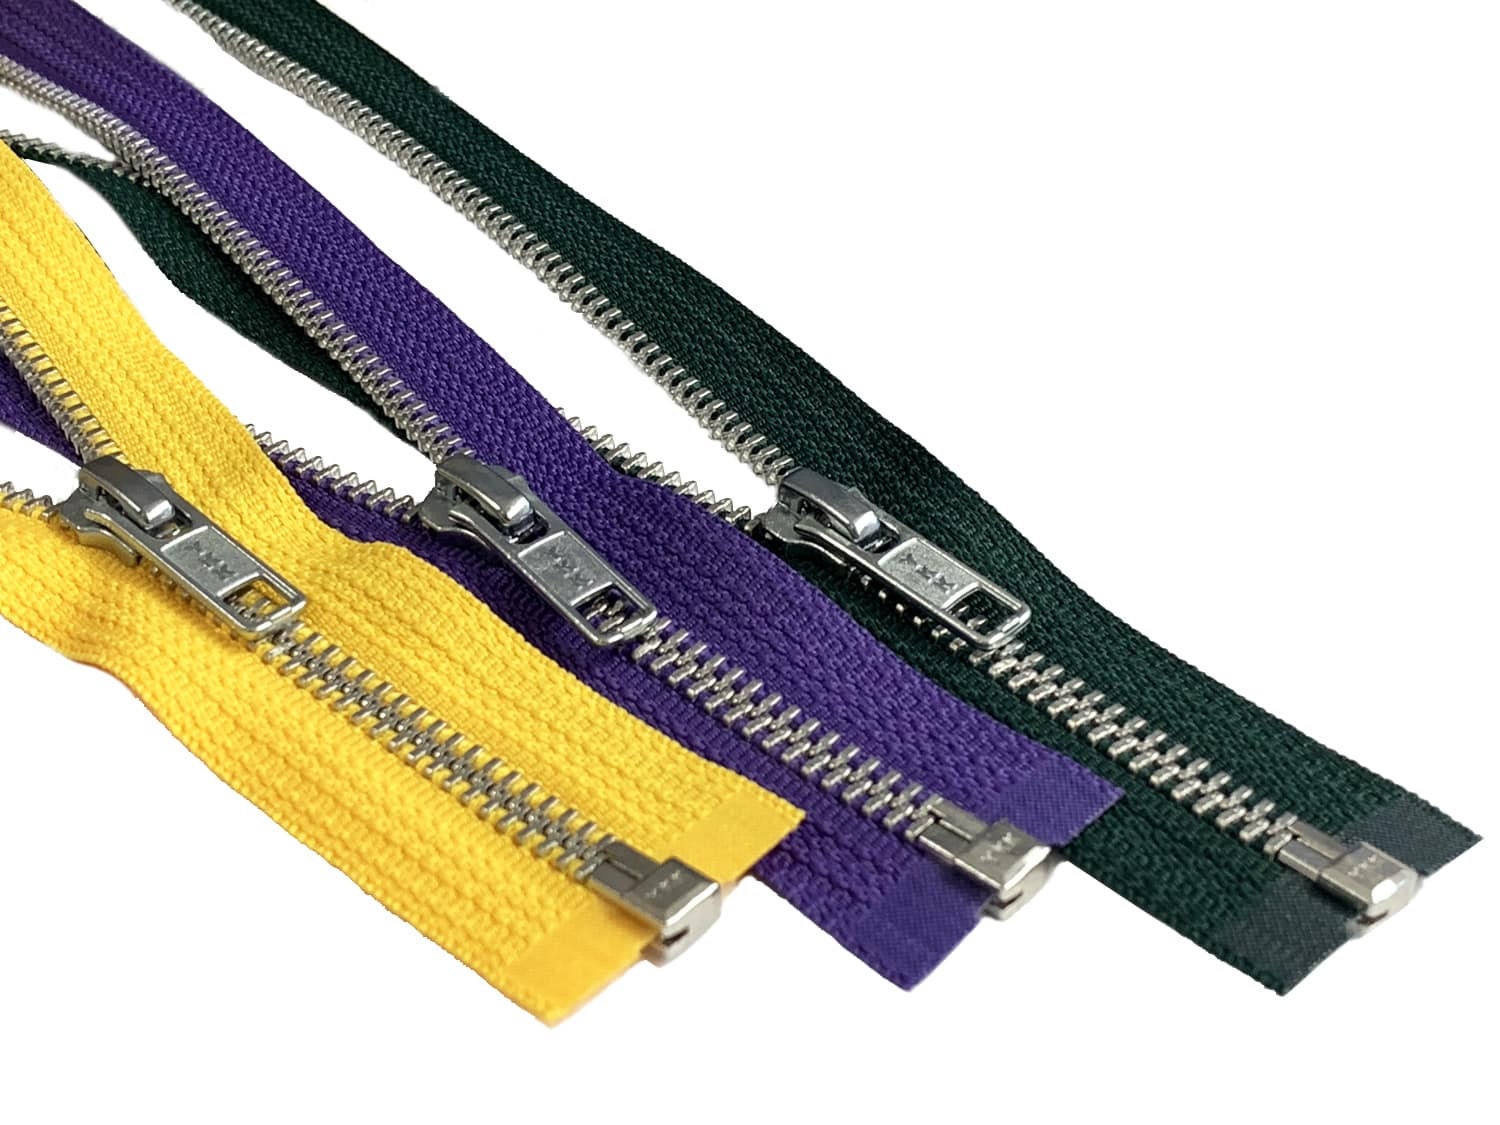 YKK develops new magnetic zipper for easy open-close - Specialty